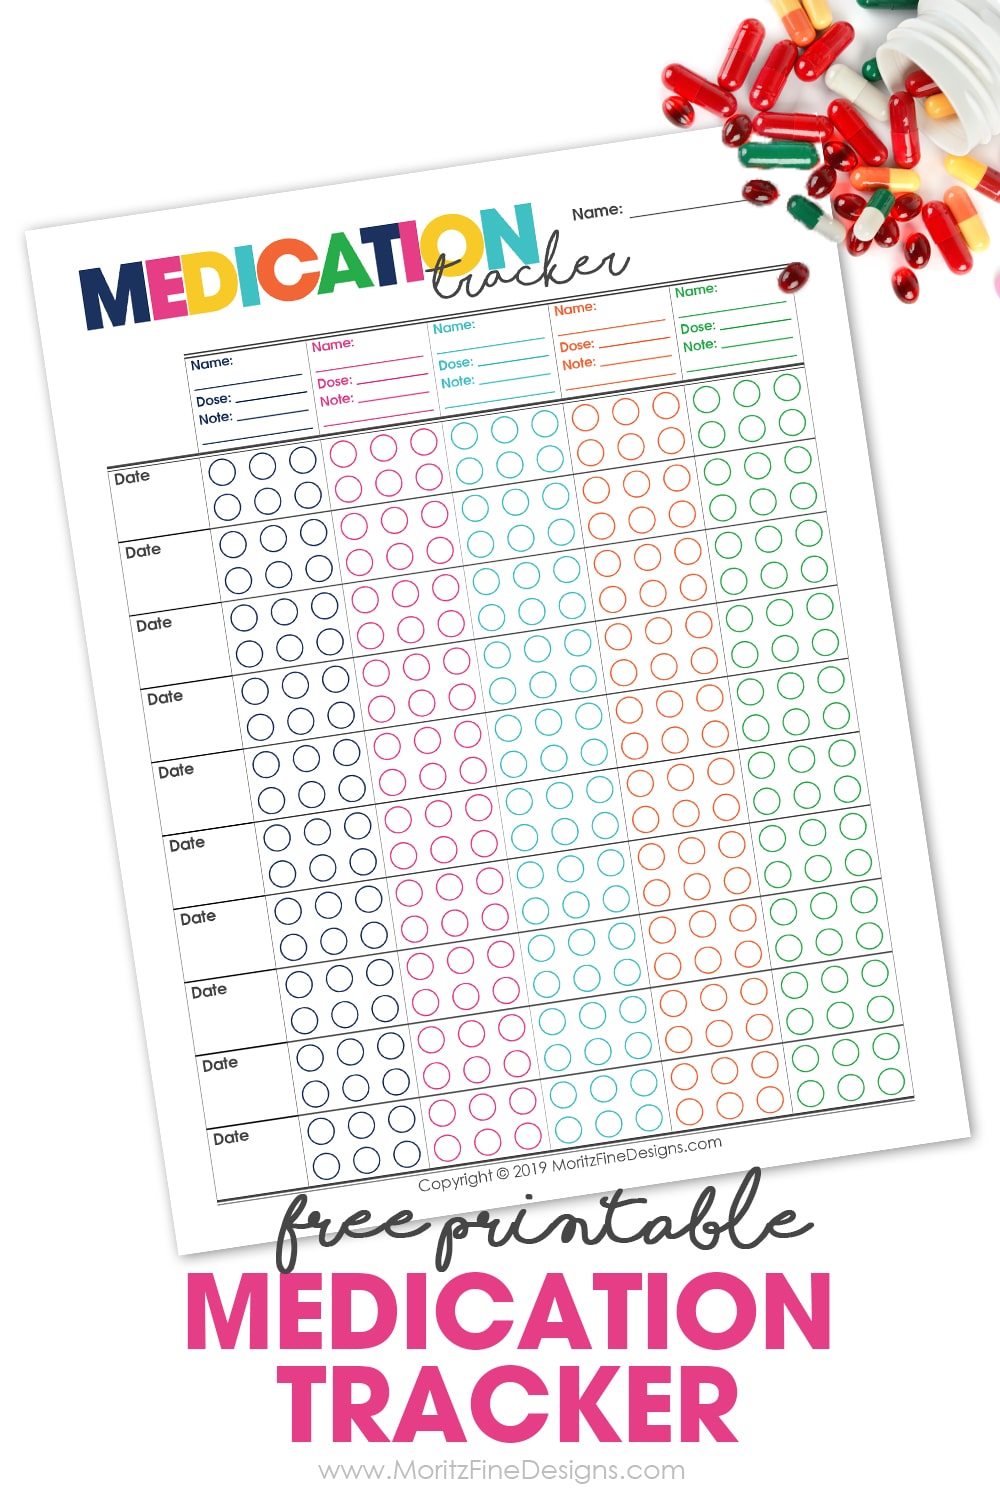 The free printable Medication Tracker is perfect for regular or one time prescriptions.It can be used for all ages-babies, kids, adults and senior citizens.